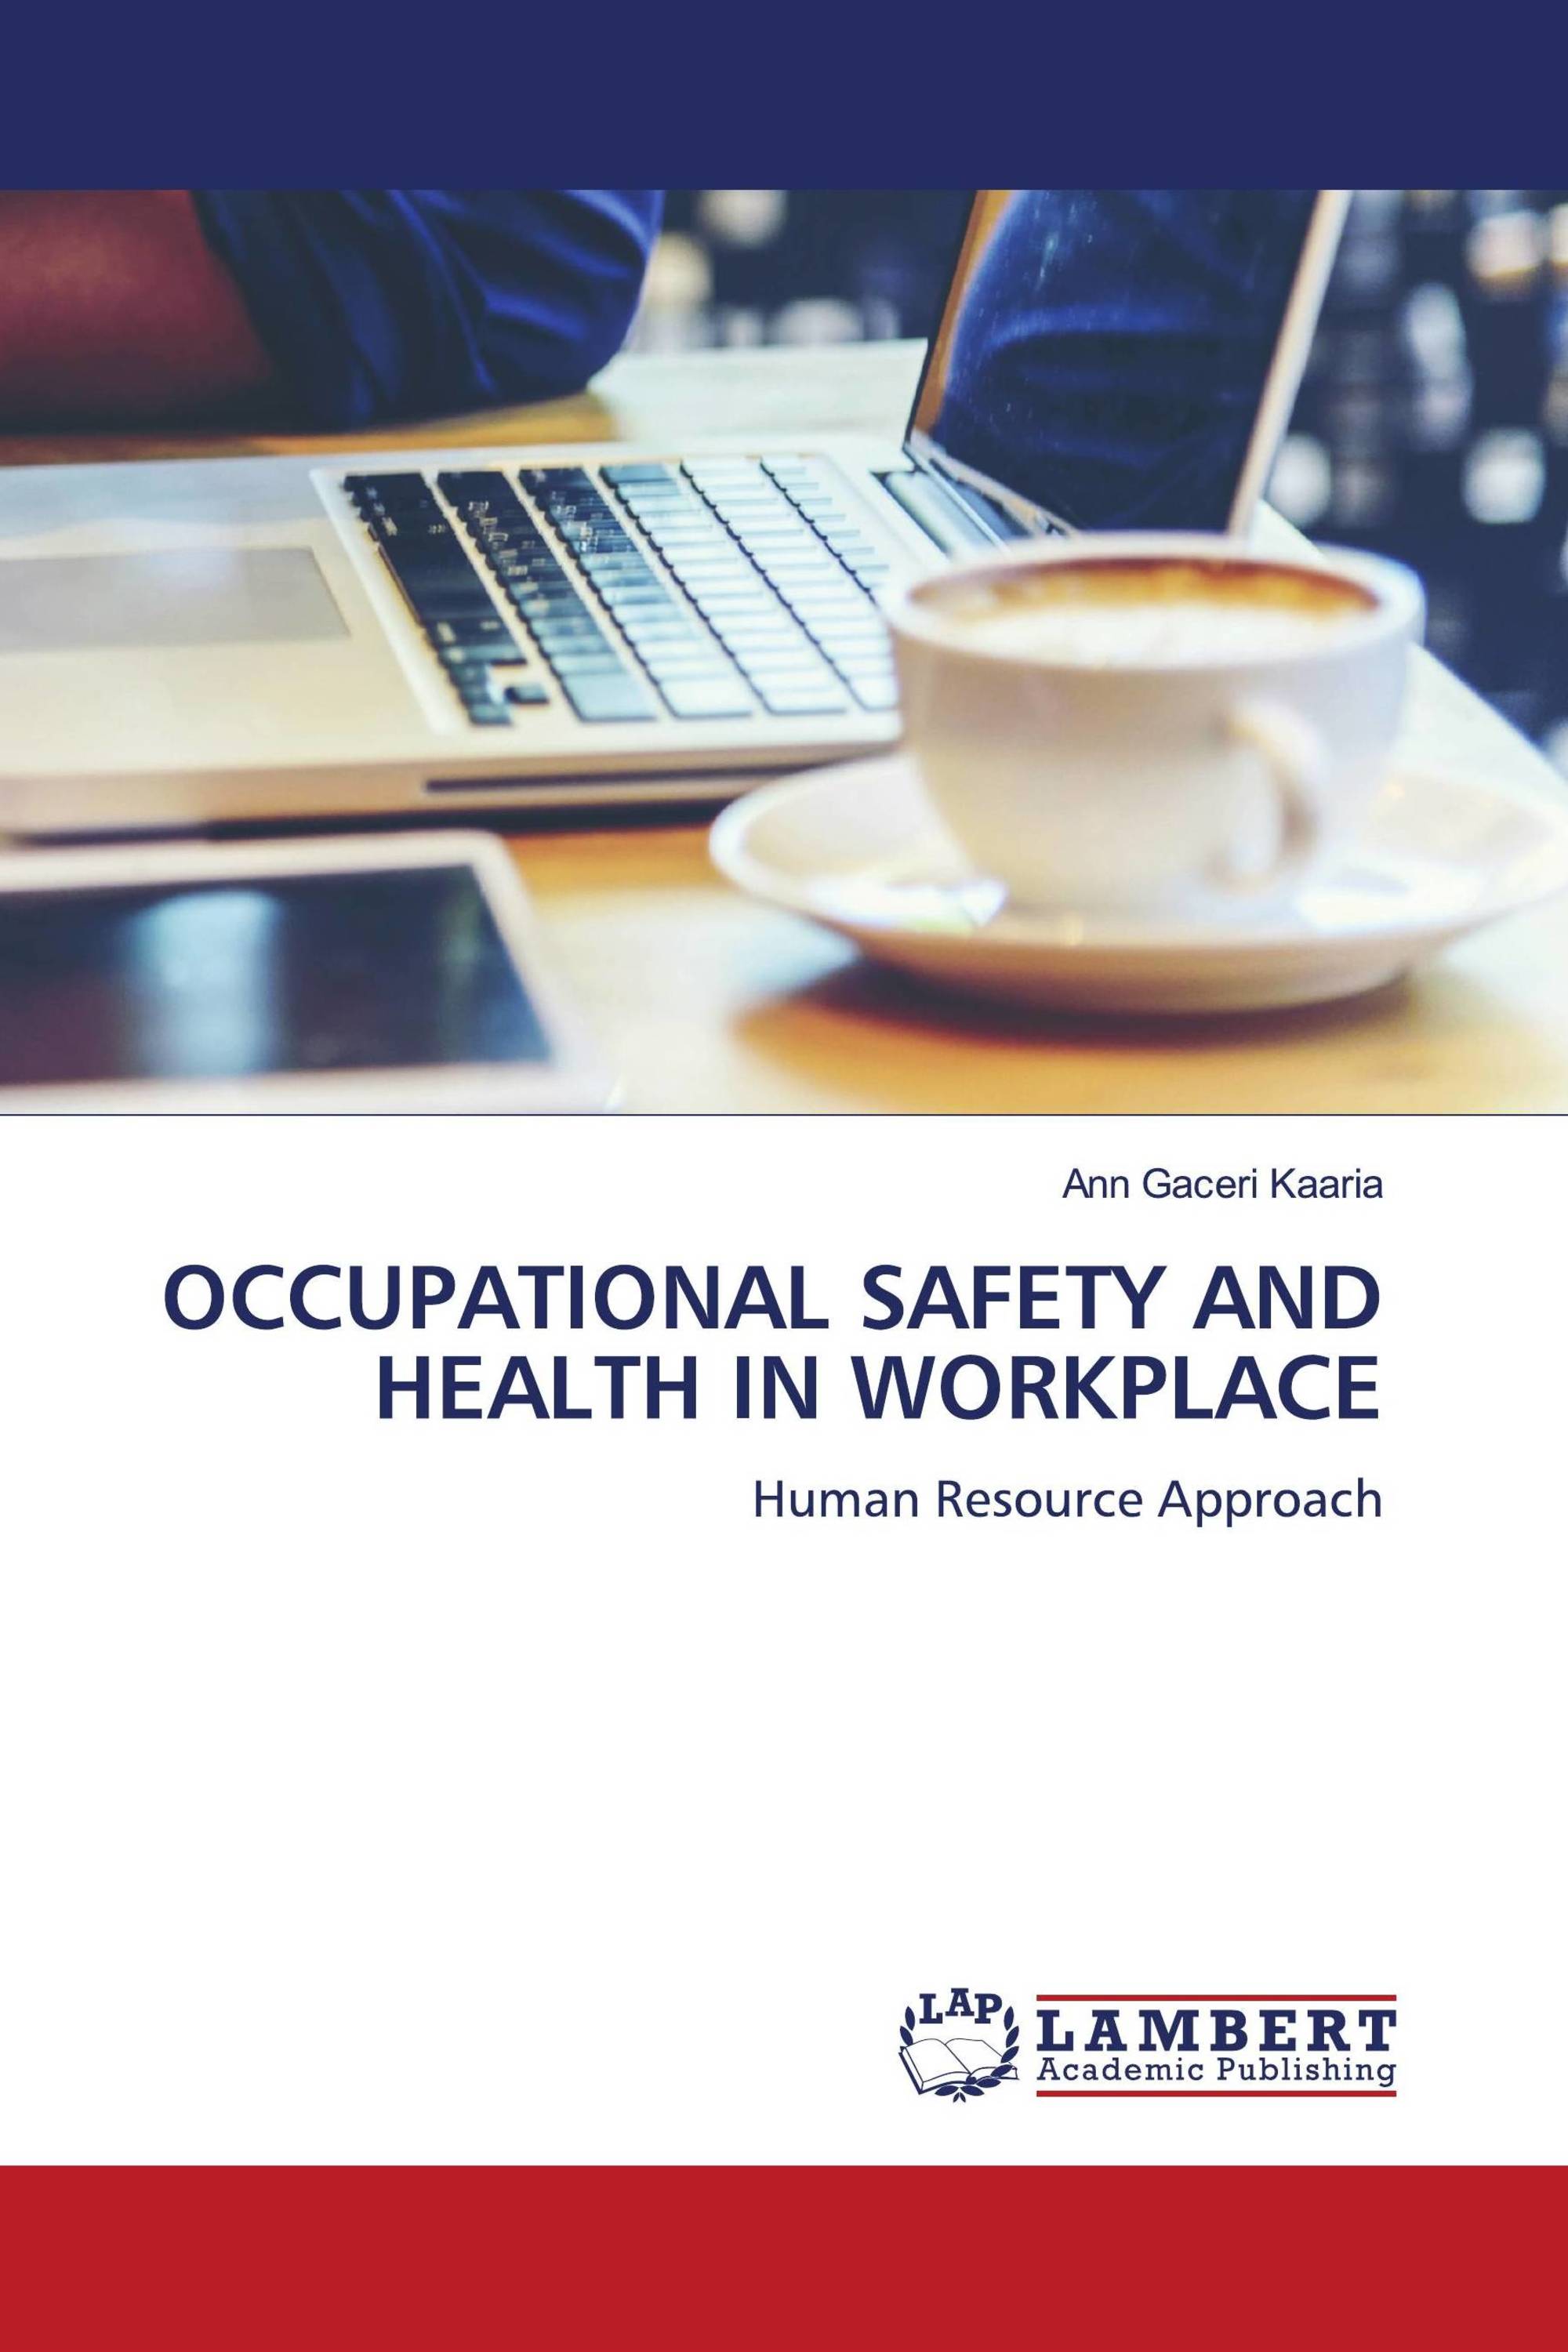 OCCUPATIONAL SAFETY AND HEALTH IN WORKPLACE